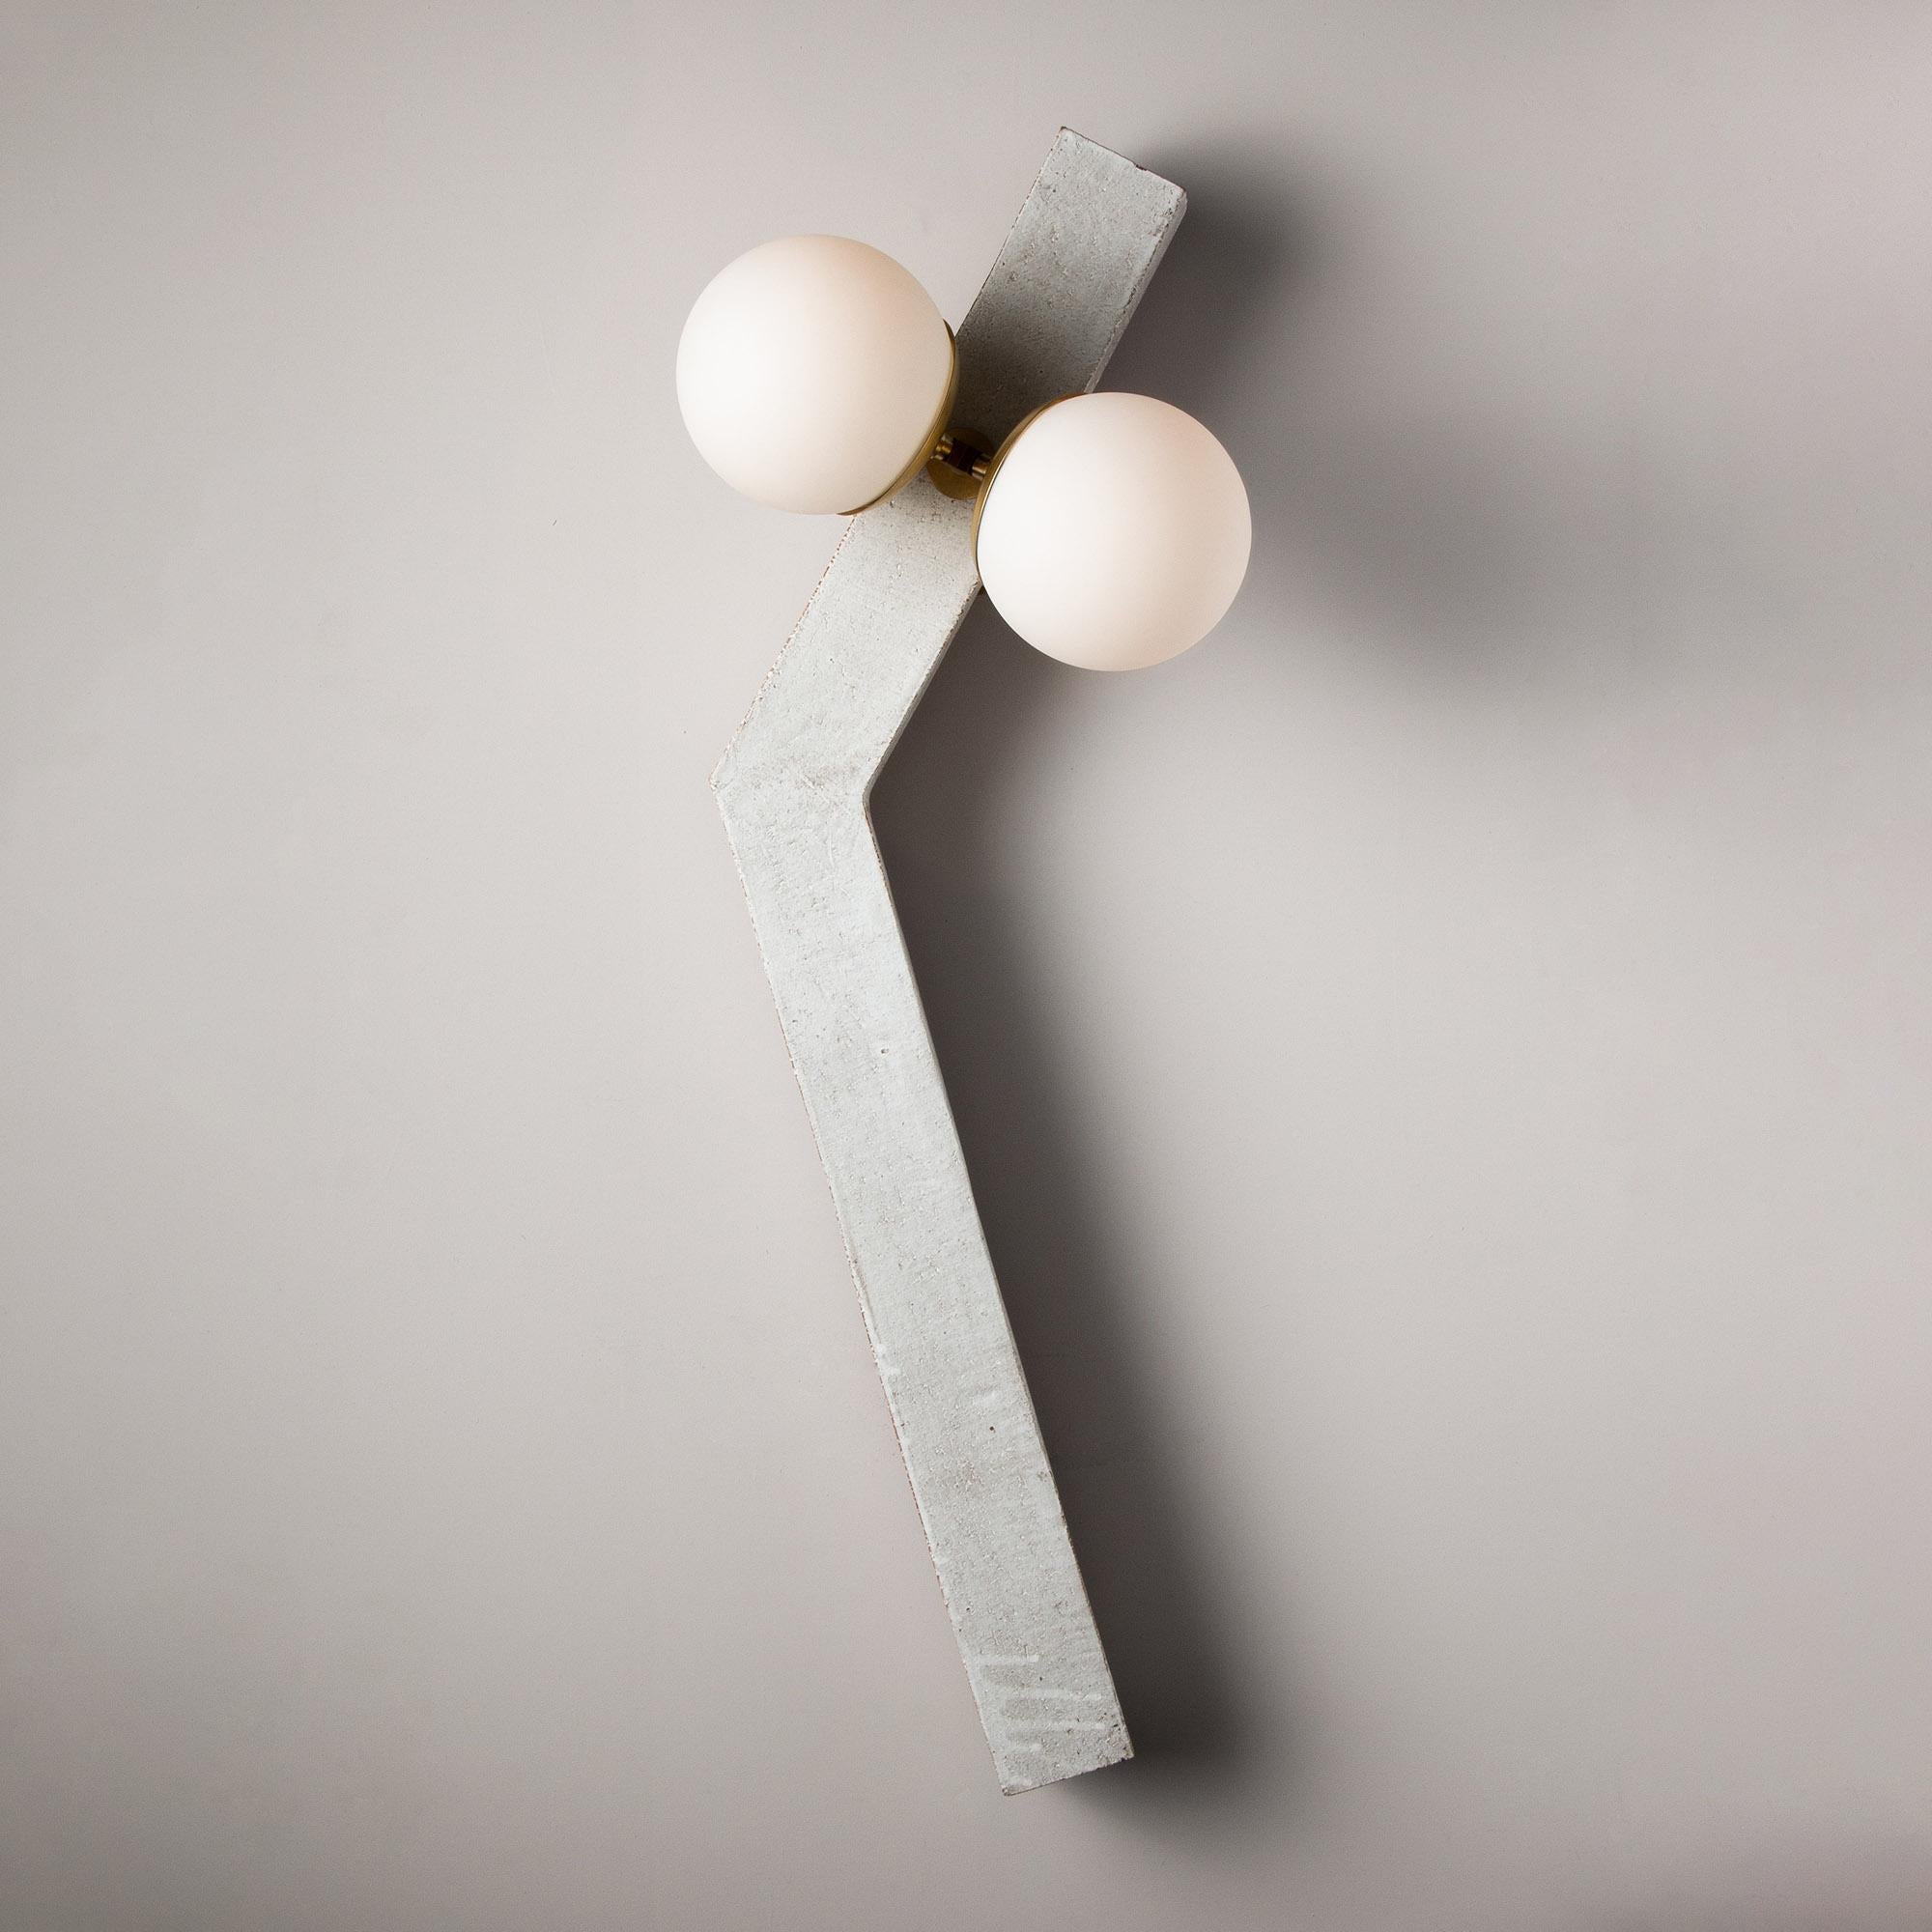 Inspired by midcentury Brutalist architecture and building materials, this playful handmade sconce balances a strong substantial ceramic base with delicate brass hardware and matte white glass. The angled ceramic center column is handcrafted from a